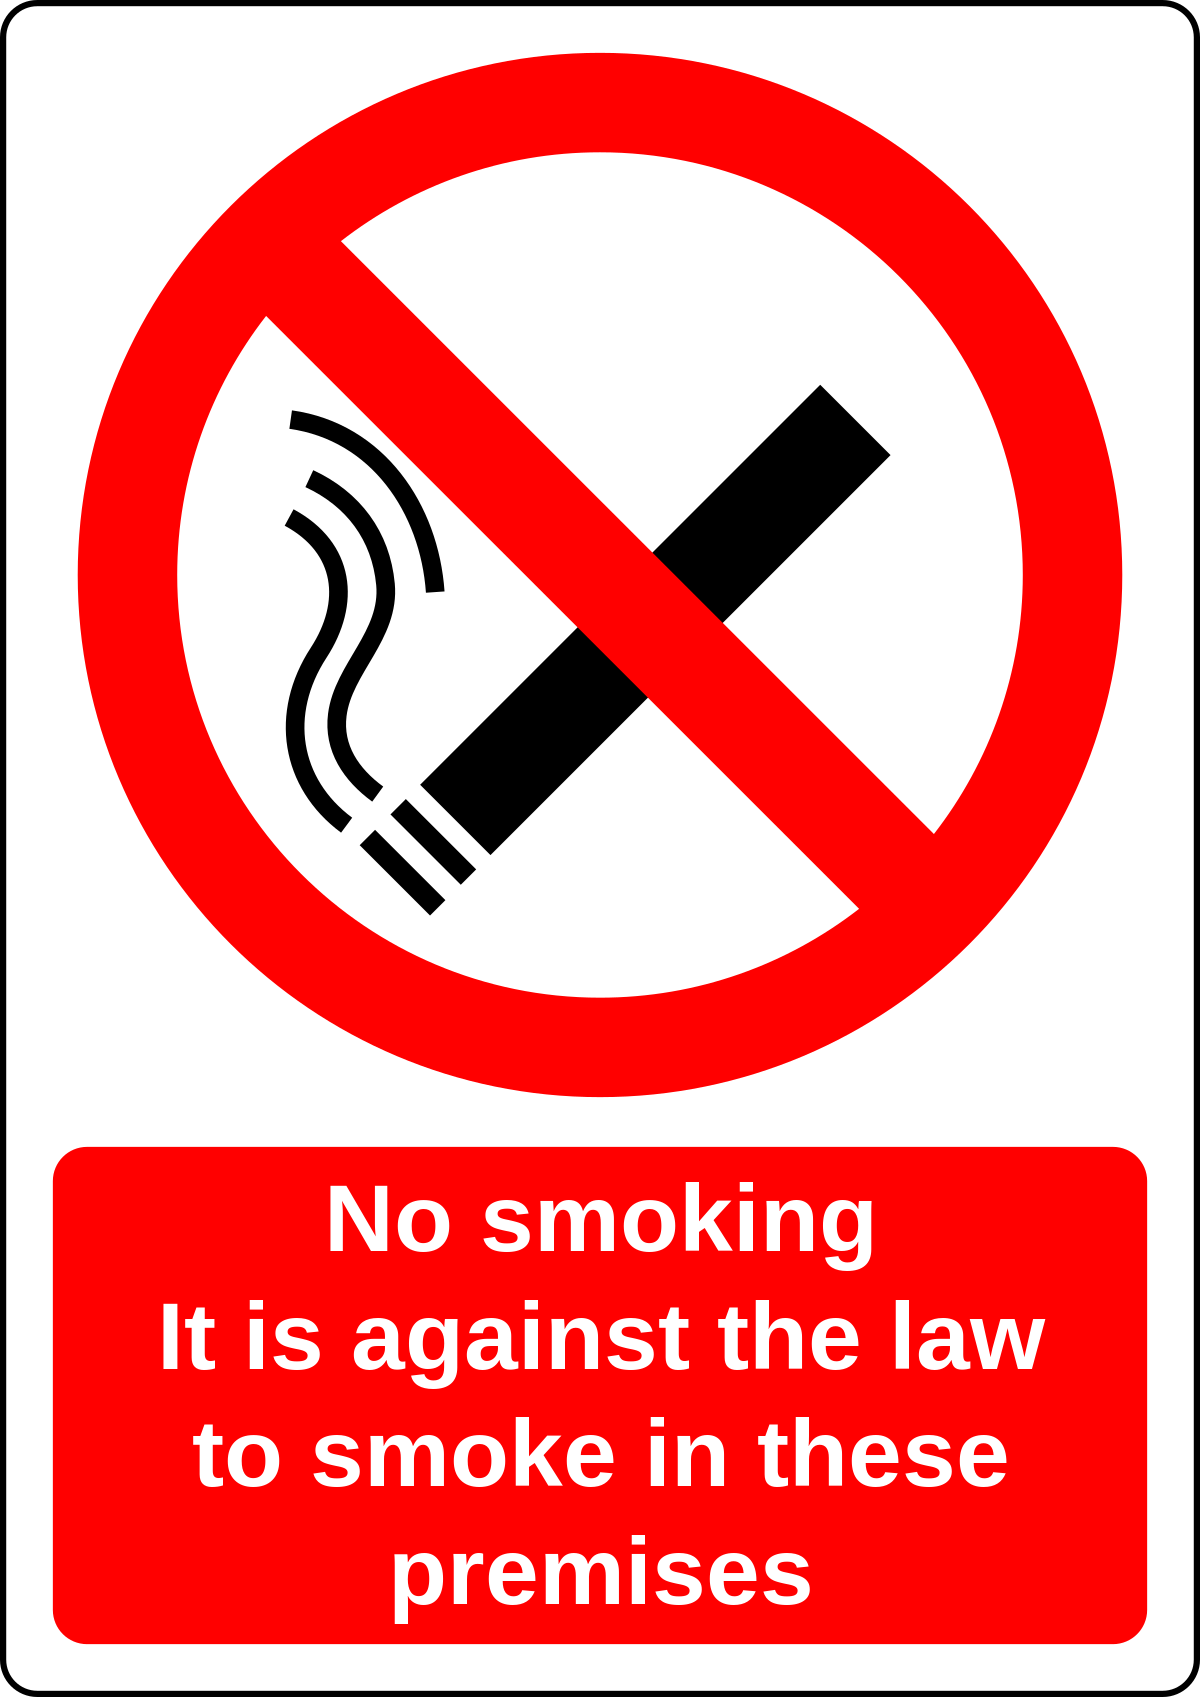 Graphical representation of public opinion divided on the proposed UK smoking ban, showing percentages of those in favor, against, and undecided, reflecting the complex debate on health benefits versus personal freedoms.